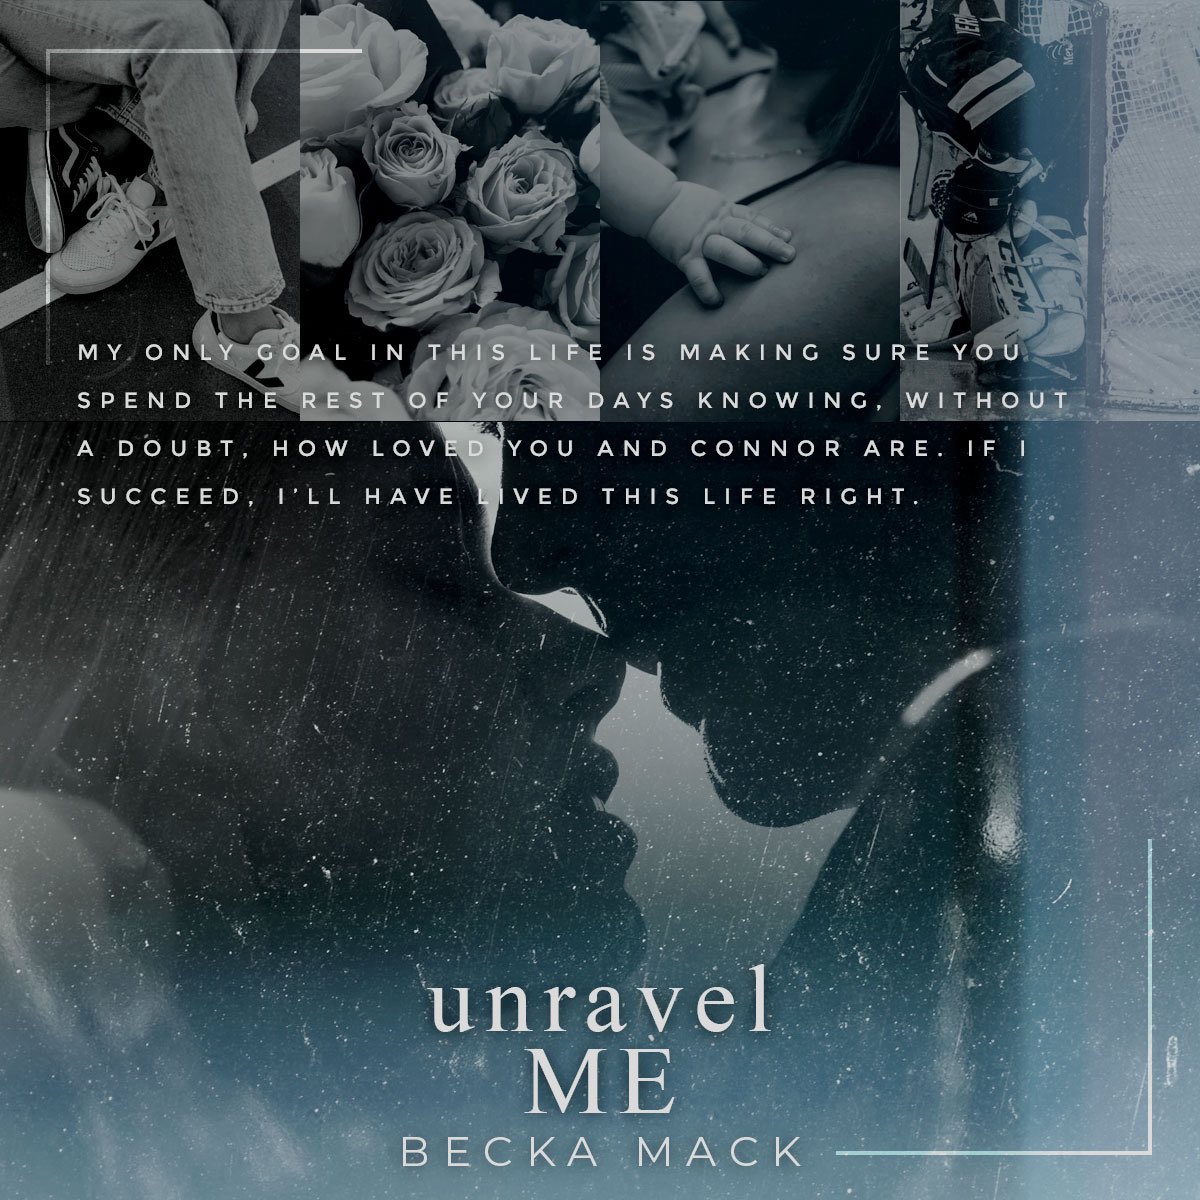 𝐔𝐧𝐫𝐚𝐯𝐞𝐥 𝐌𝐞 by Becka Mack is coming soon! Don’t forget to add this steamy hockey romance to your TBR!
📚Add to Goodreads: goodreads.com/book/show/9660… 

@wordsmithpublic #unravelmebeckamack #beckamack #hockeyromance #romancebooks #comingsoon #teaserreveal #wordsmithpublicity